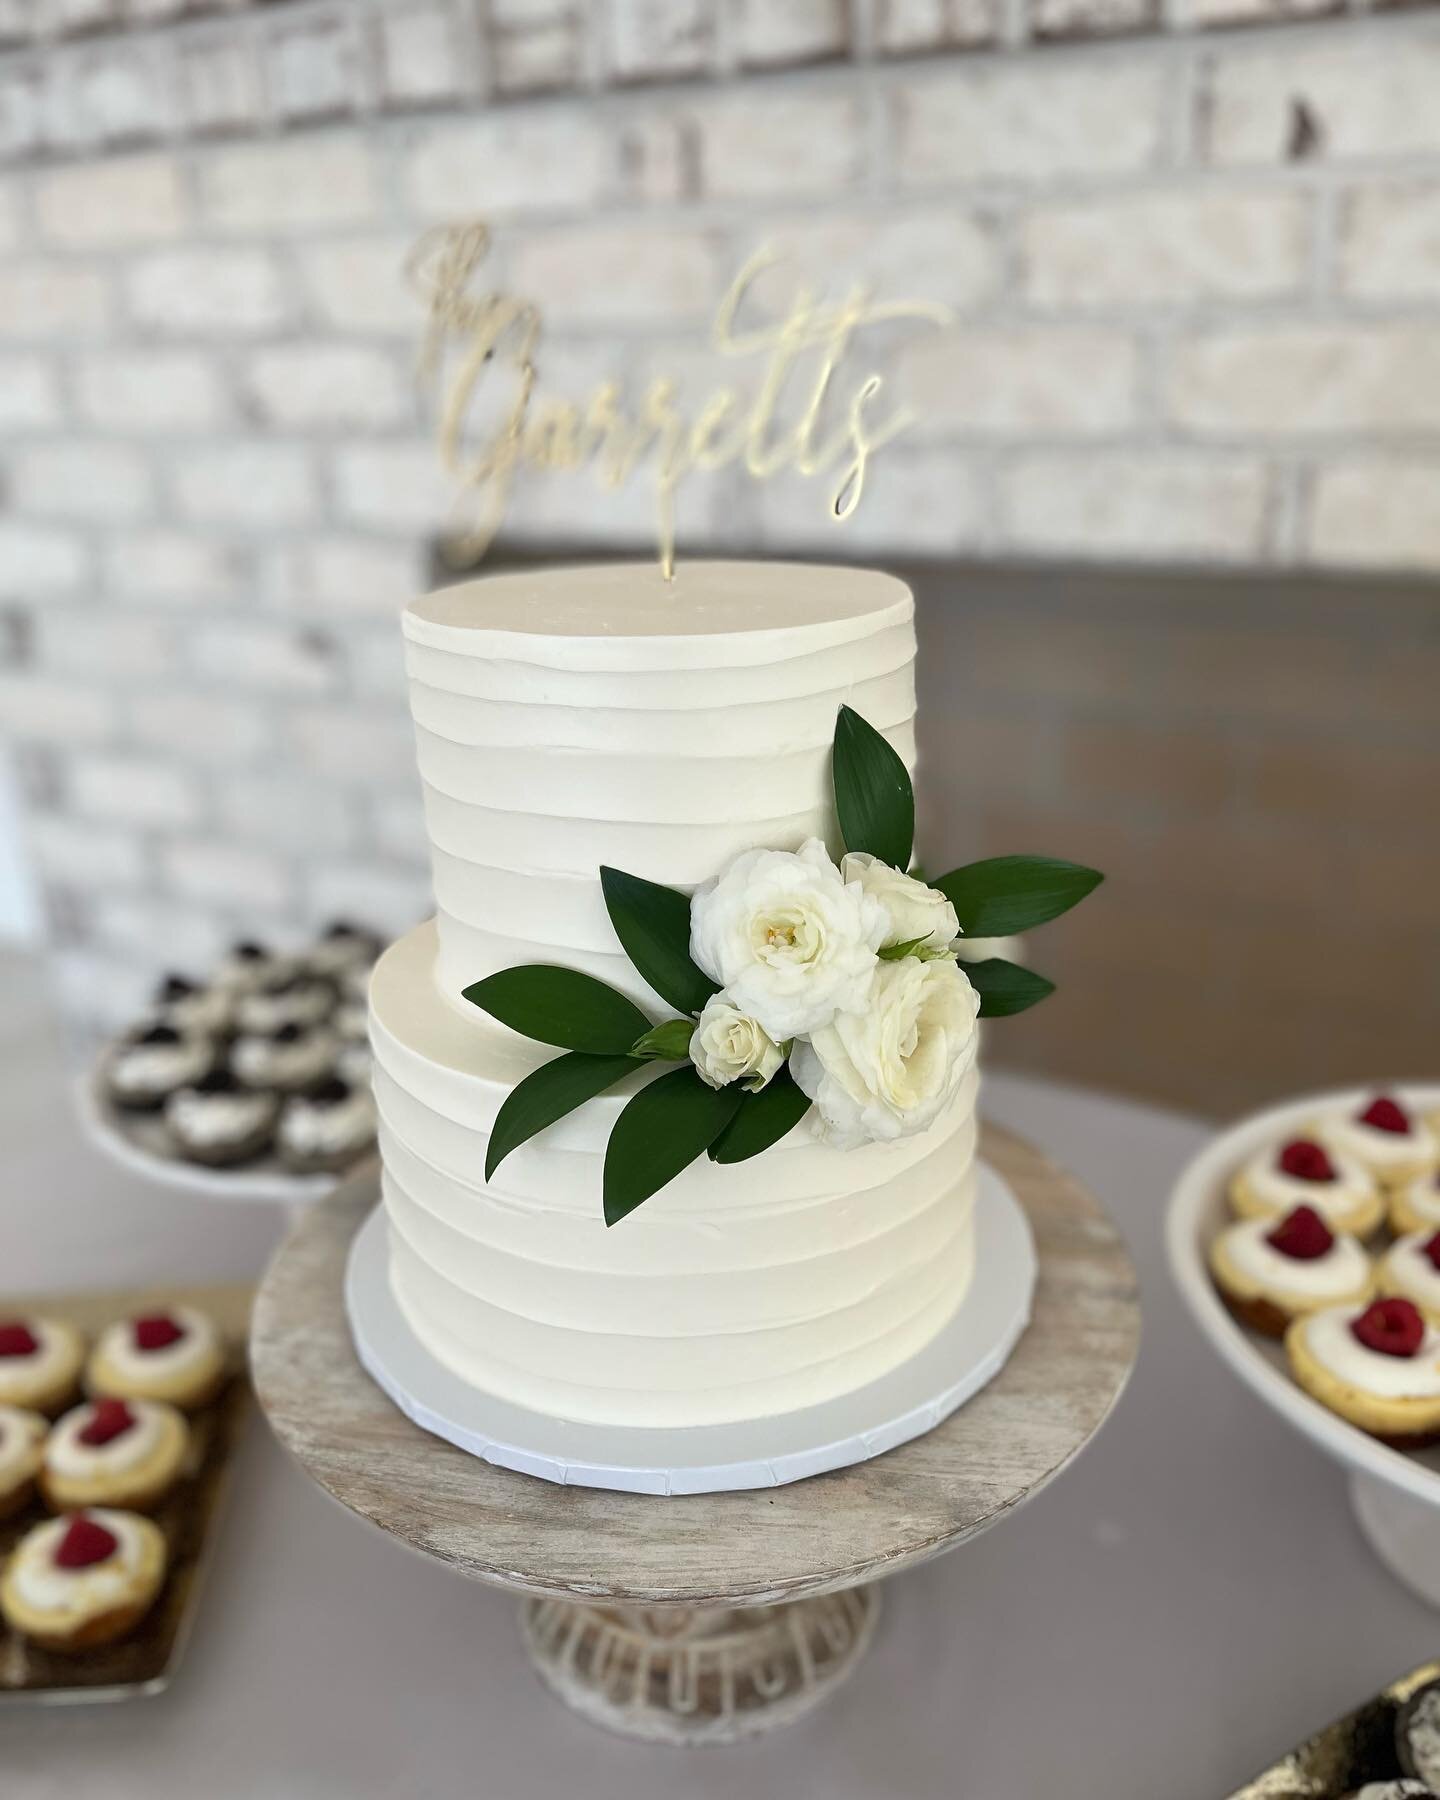 Loved this sweet cutting cake surrounded by cheesecakes! 

Cake flavor: vanilla cake &amp; cookies &amp; cream buttercream 
Cheesecakes: cookies &amp; cream 🍪 and lemon raspberry 🍋

What flavor would you choose?!

#weddingcake #weddingdesserts #che